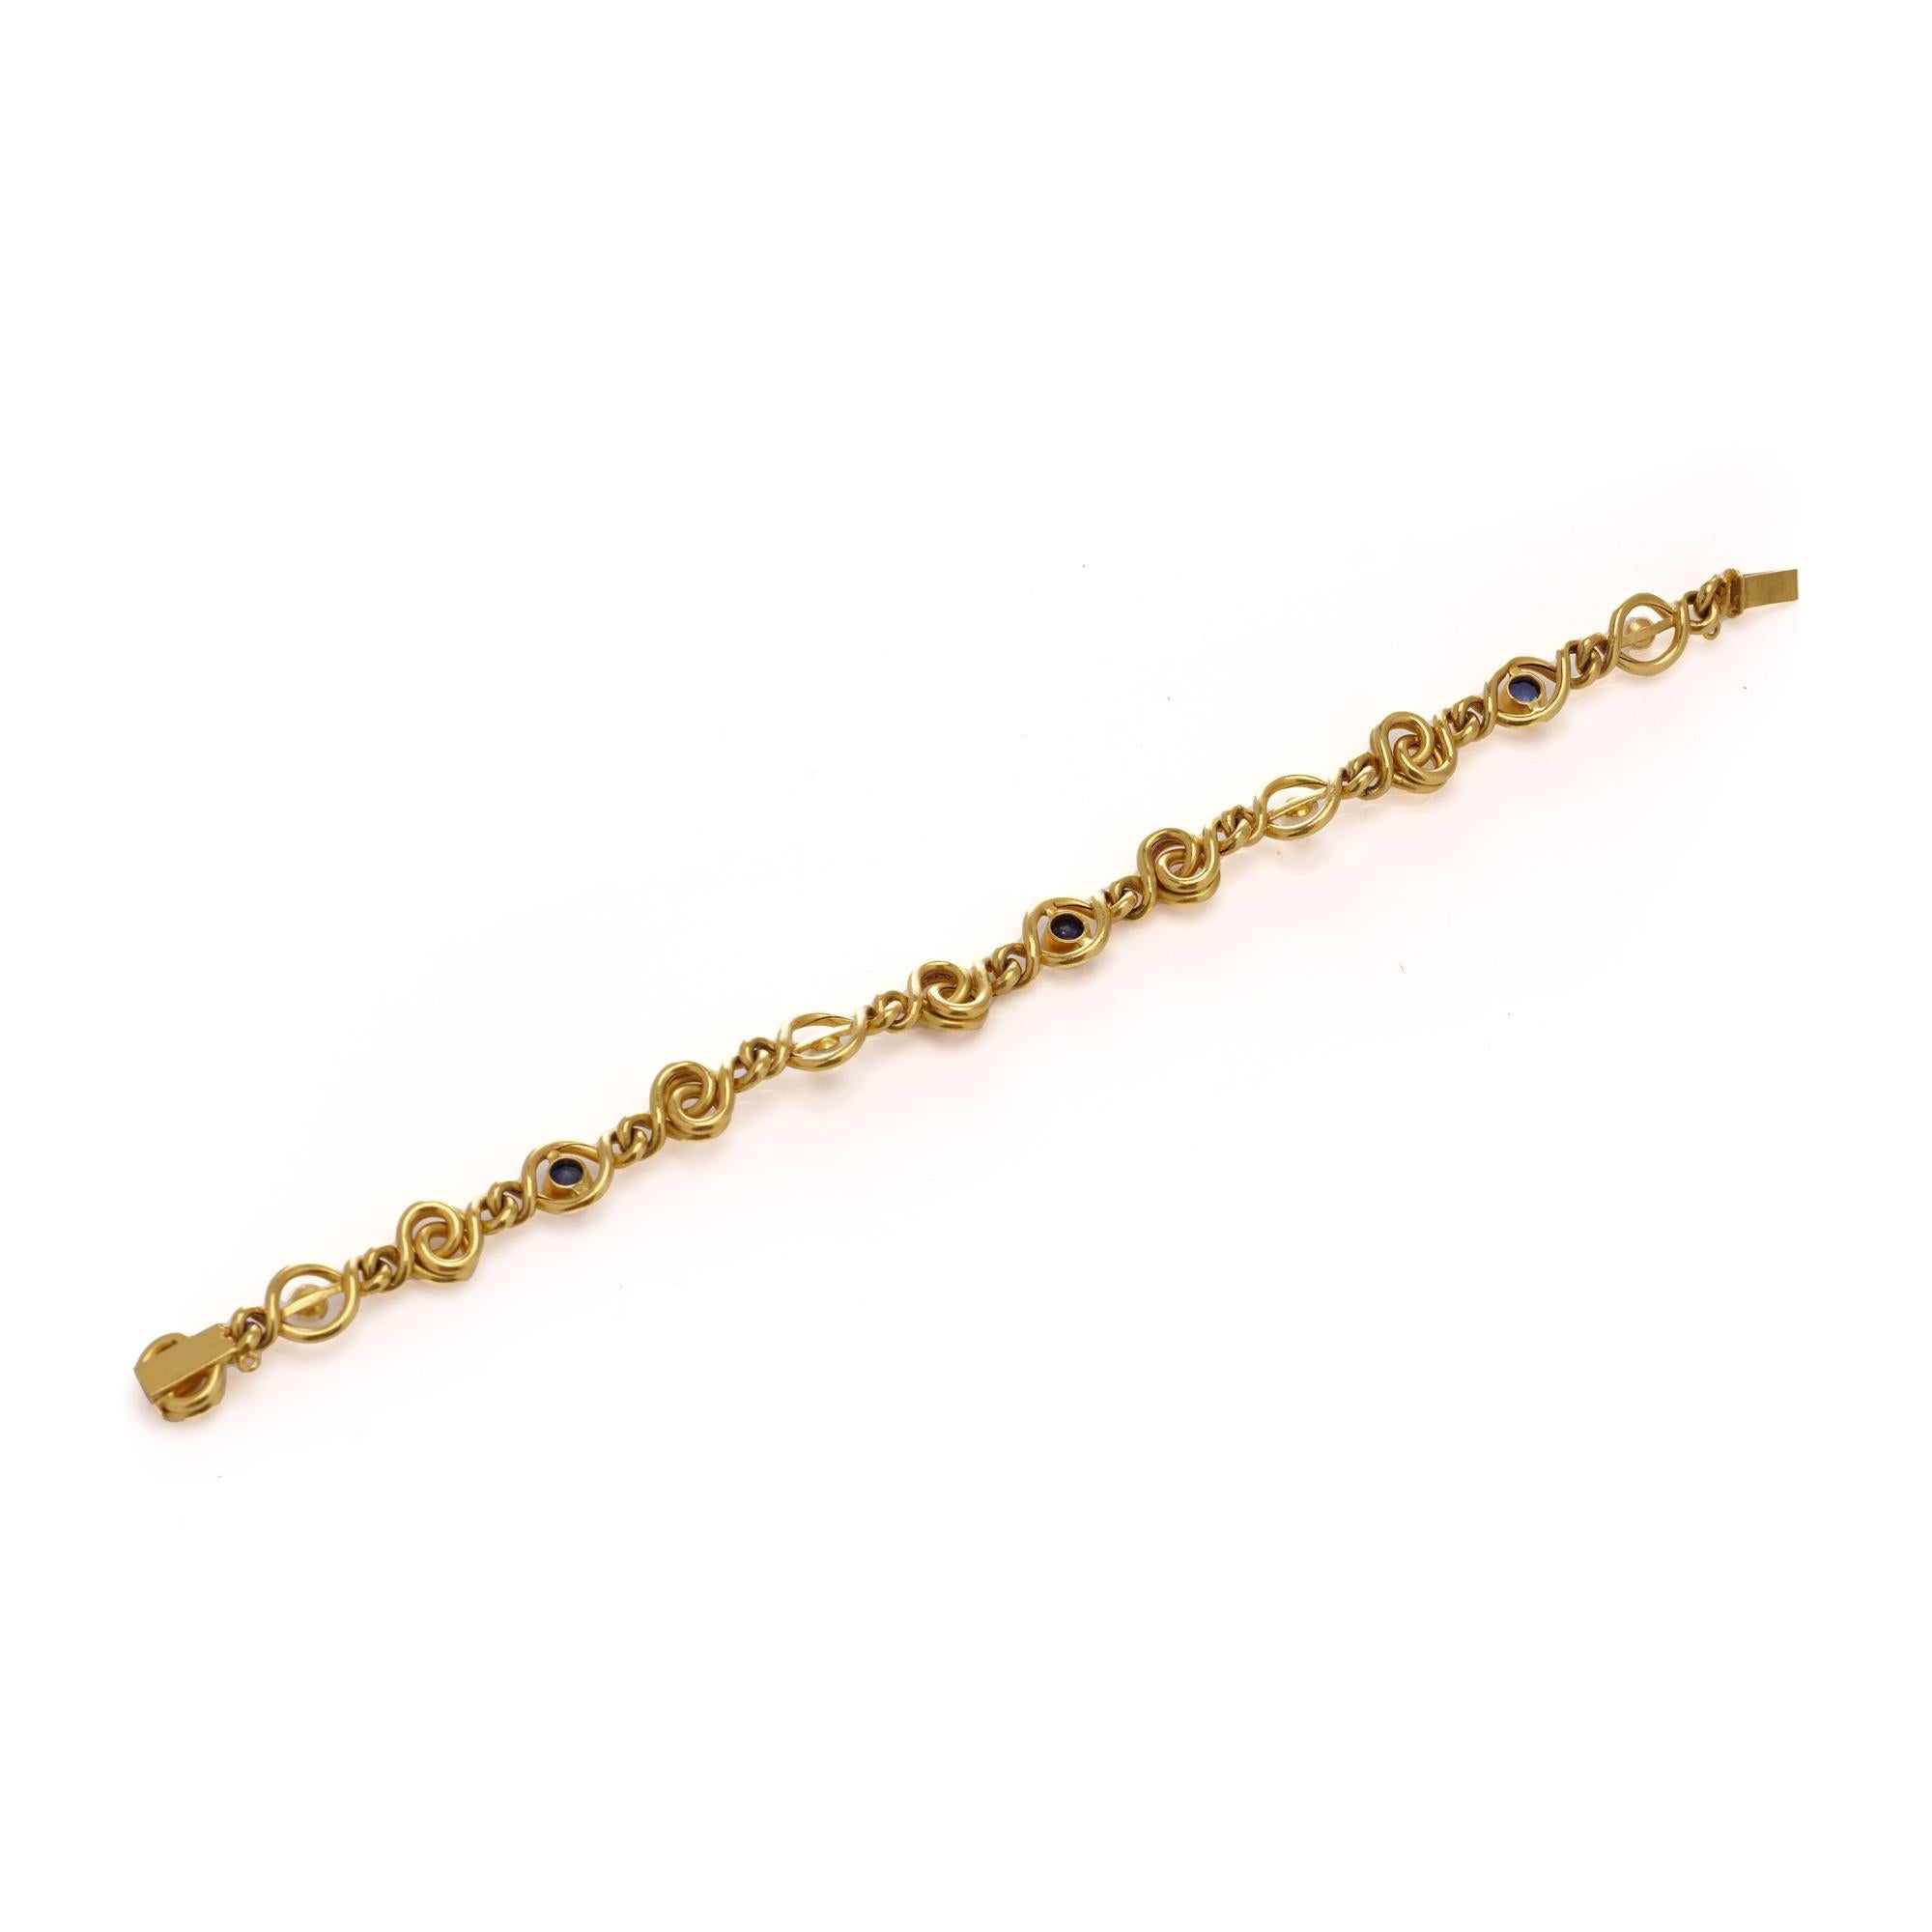 Indulge in the elegance of this exquisite French antique bracelet by Jules Rousseau.
Crafted in luxurious 24kt yellow gold, it features an alternating fancy links design, embracing lustrous natural pearls and stunning blue sapphires.
Made in France,